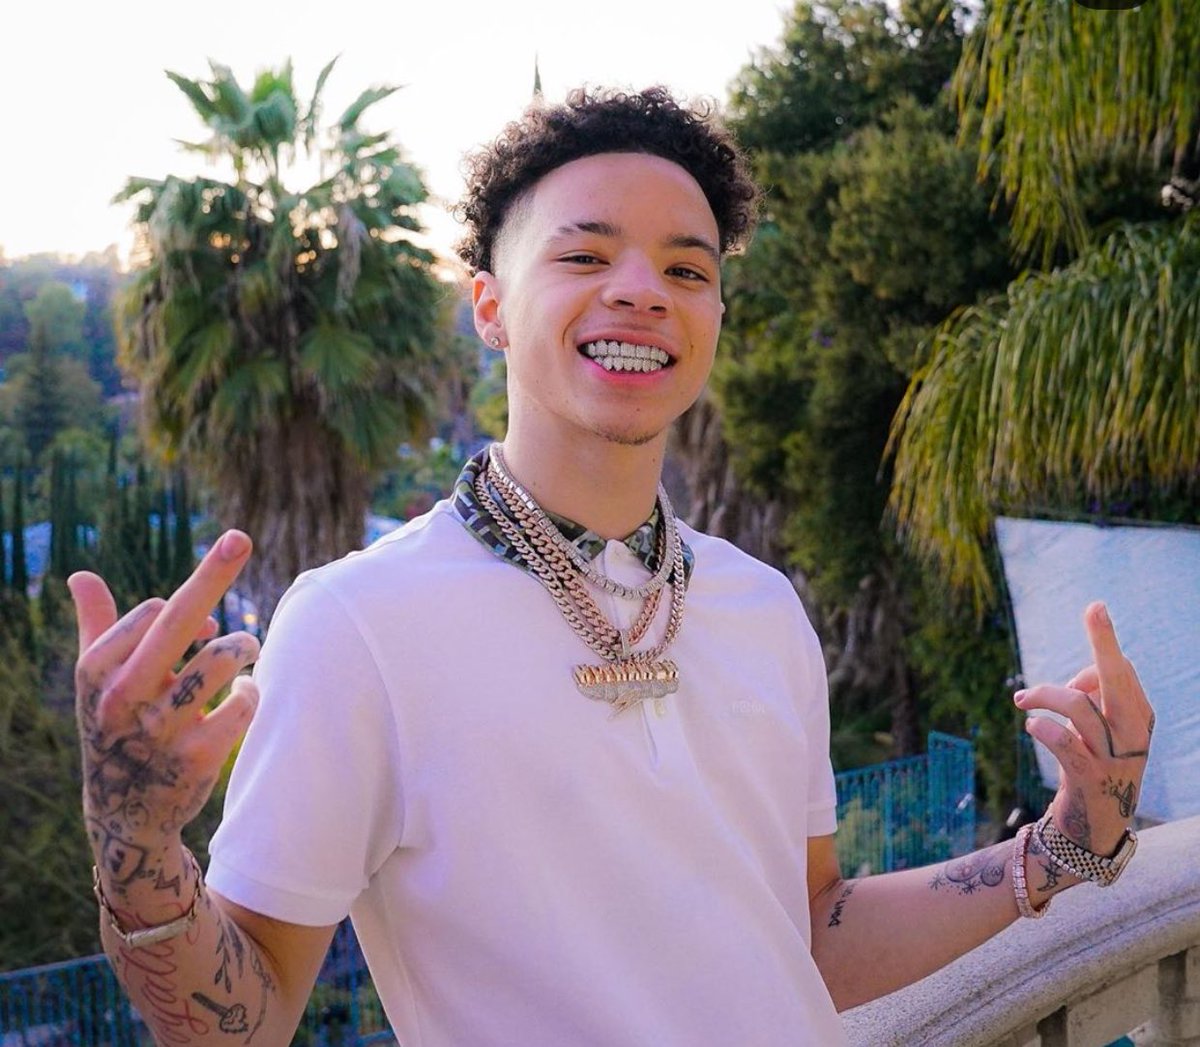 lil mosey is a great artist, people are just scared to admit it.